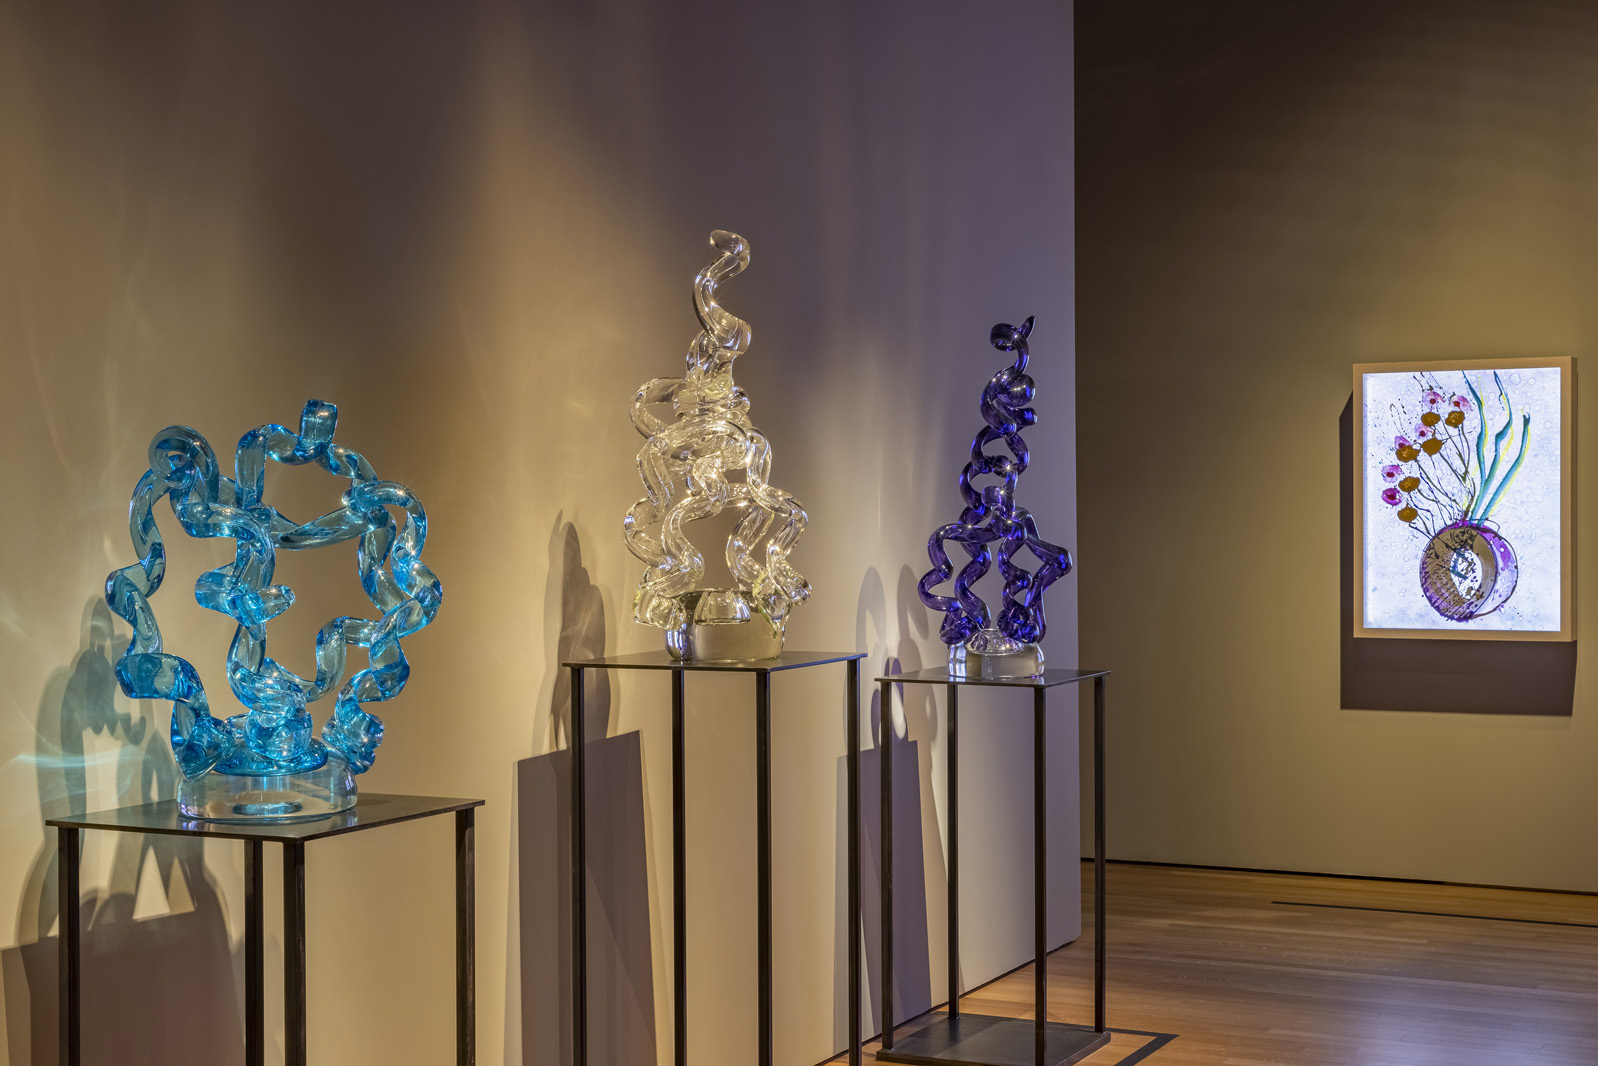 Rotolo, 2015-18, and Ikebana Glass on Glass Painting, 2017 by Dale Chihuly